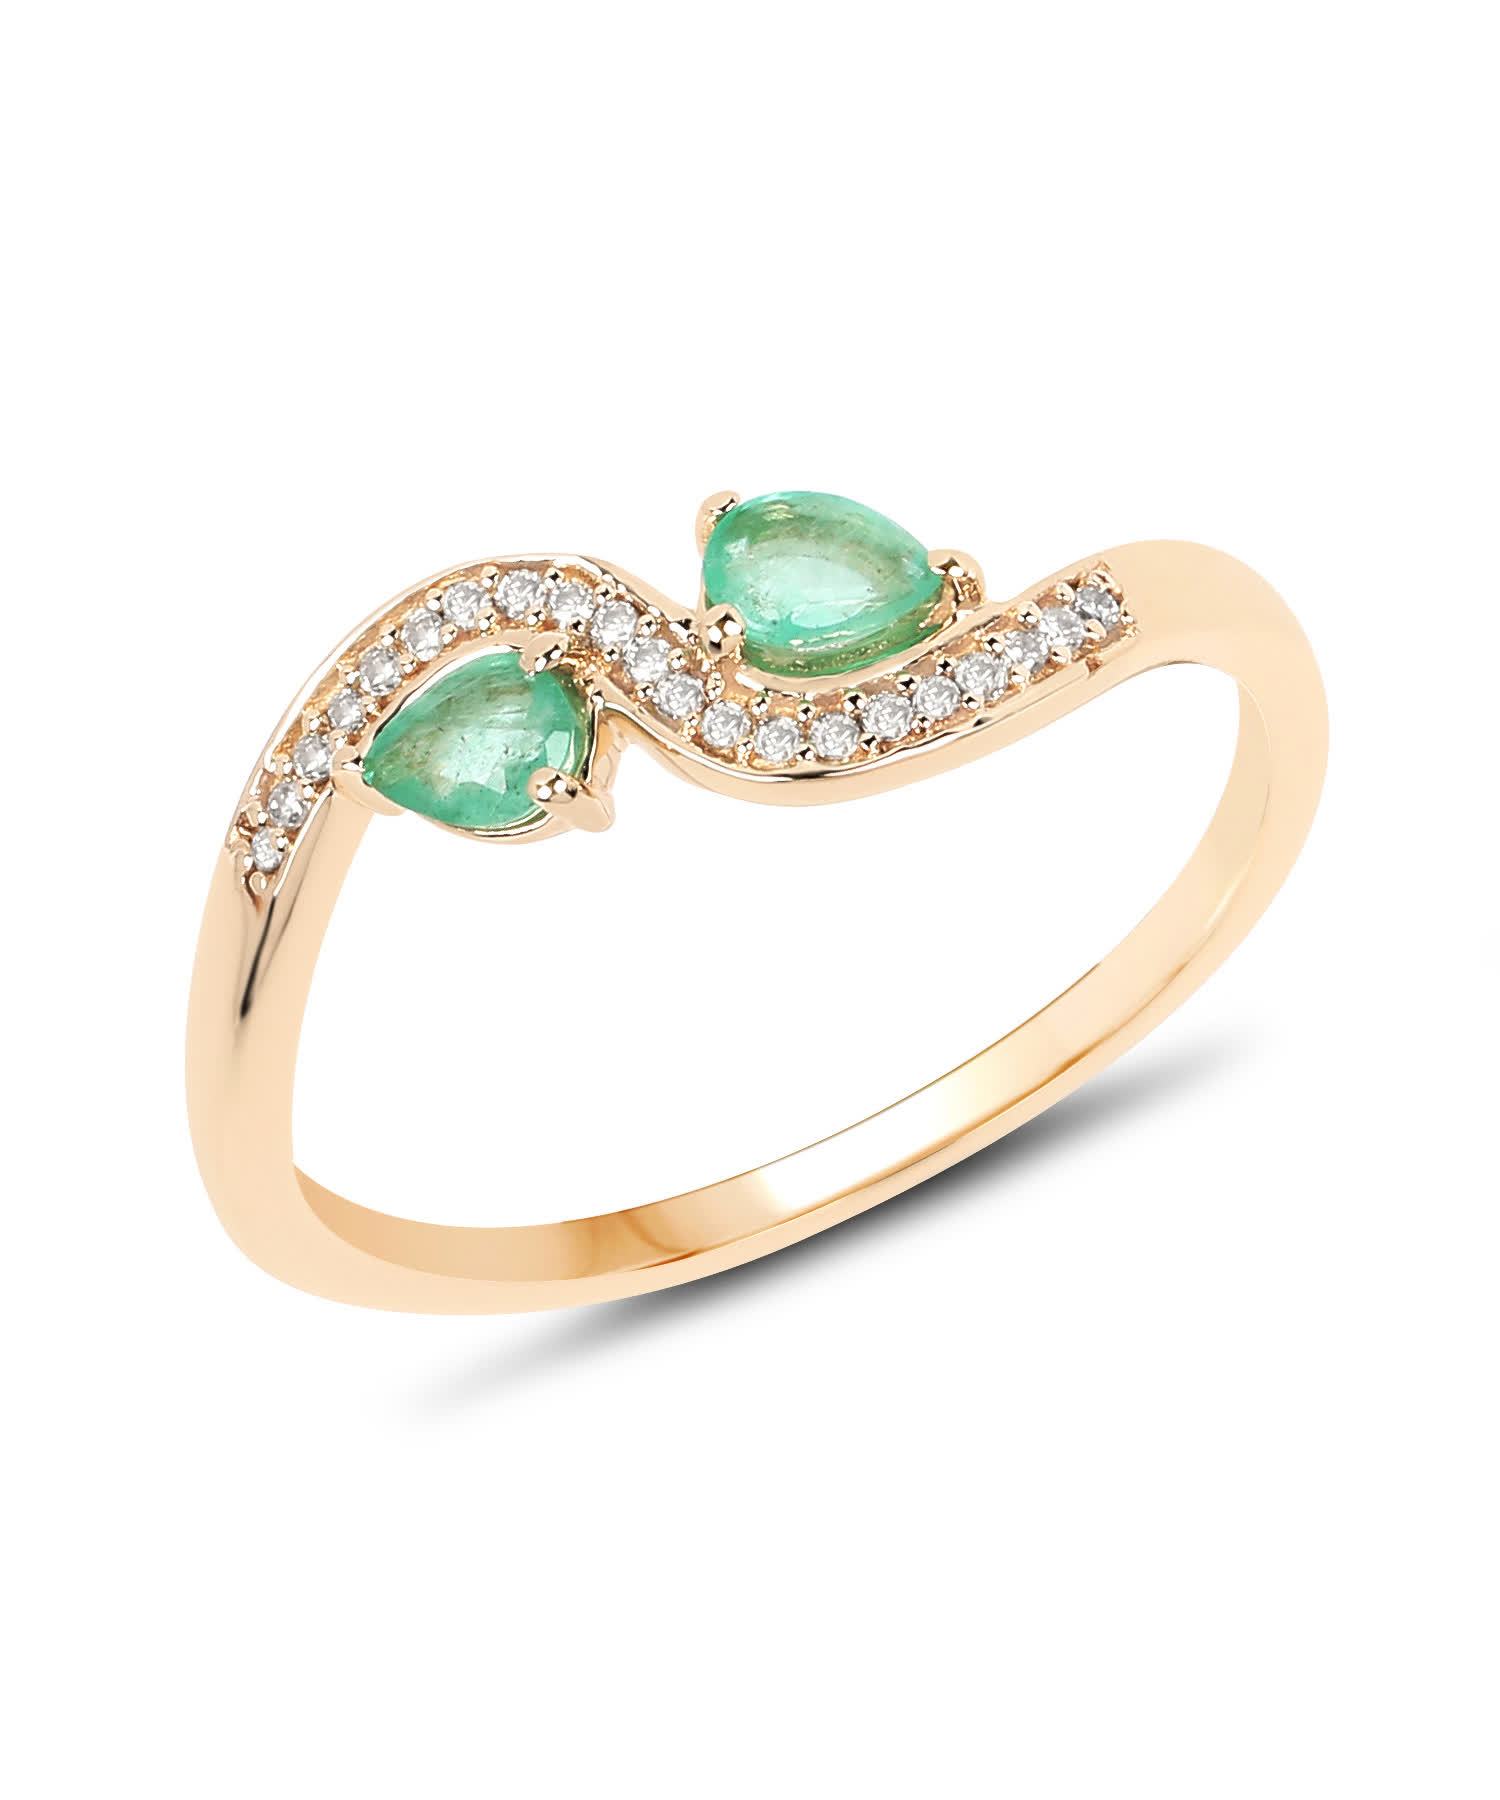 0.36ctw Natural Zambian Emerald and Diamond 14k Gold Ring View 1